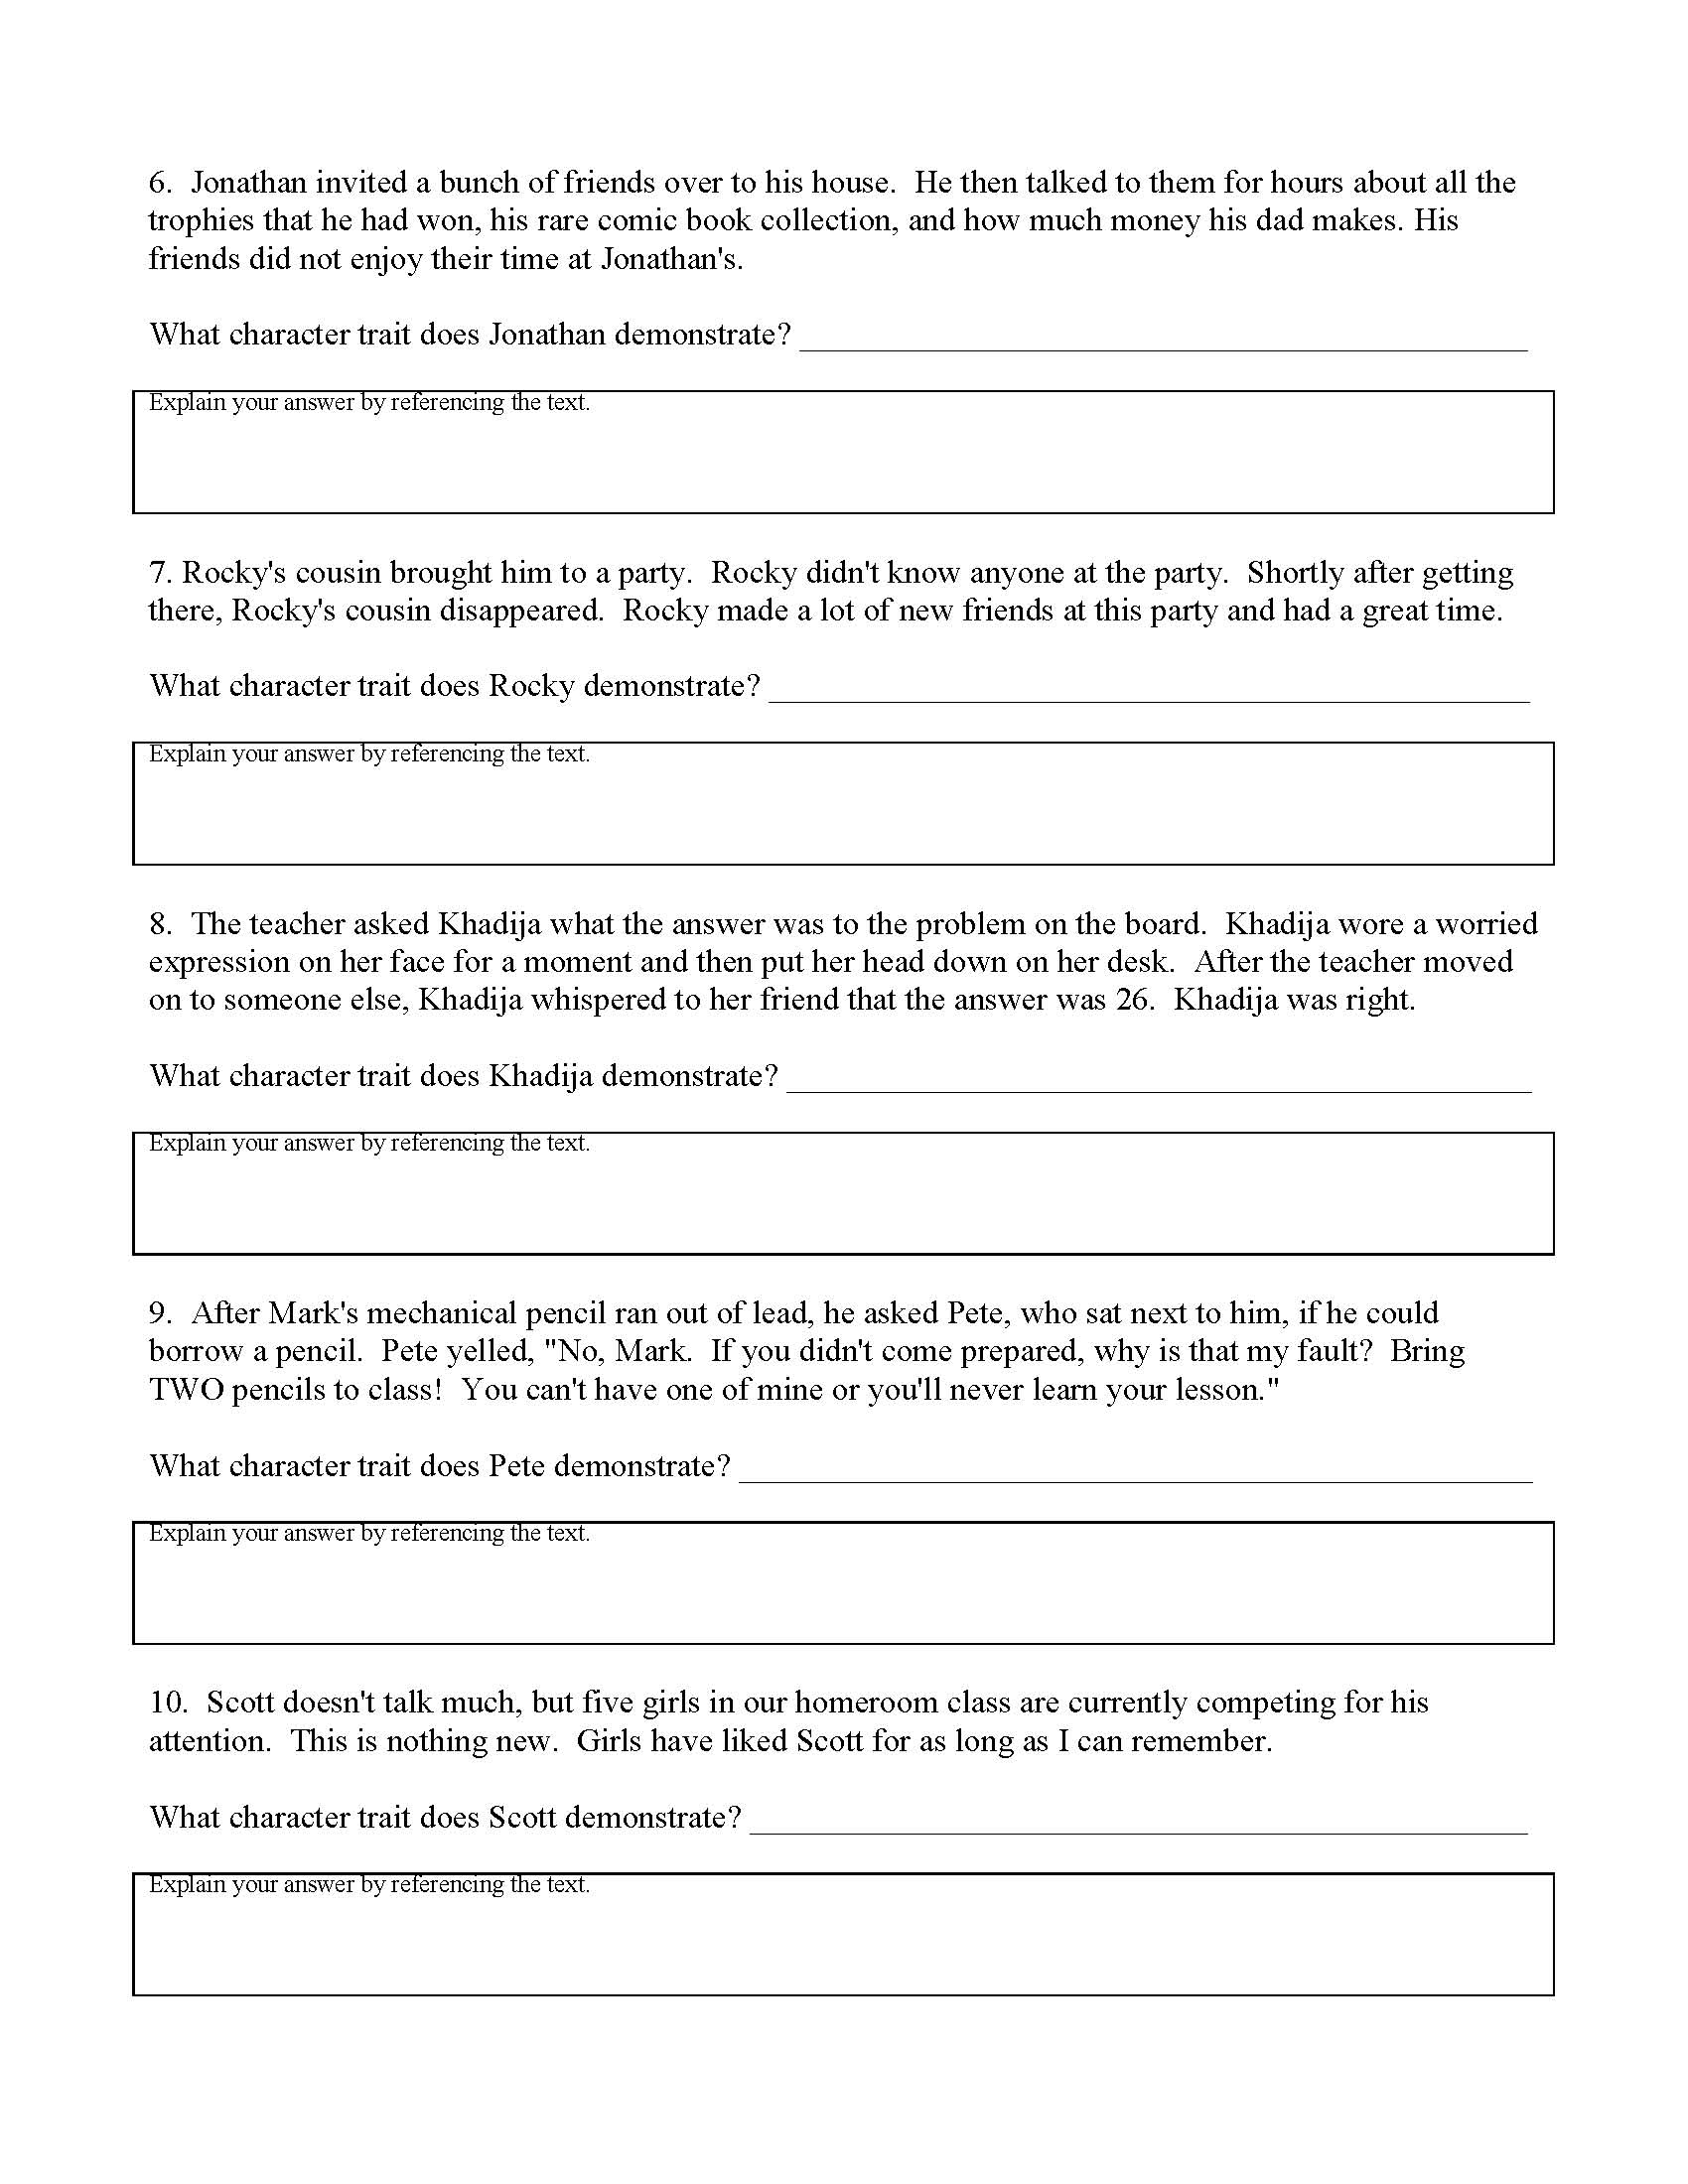 Indirect Character Traits Worksheet Answers Worksheet List